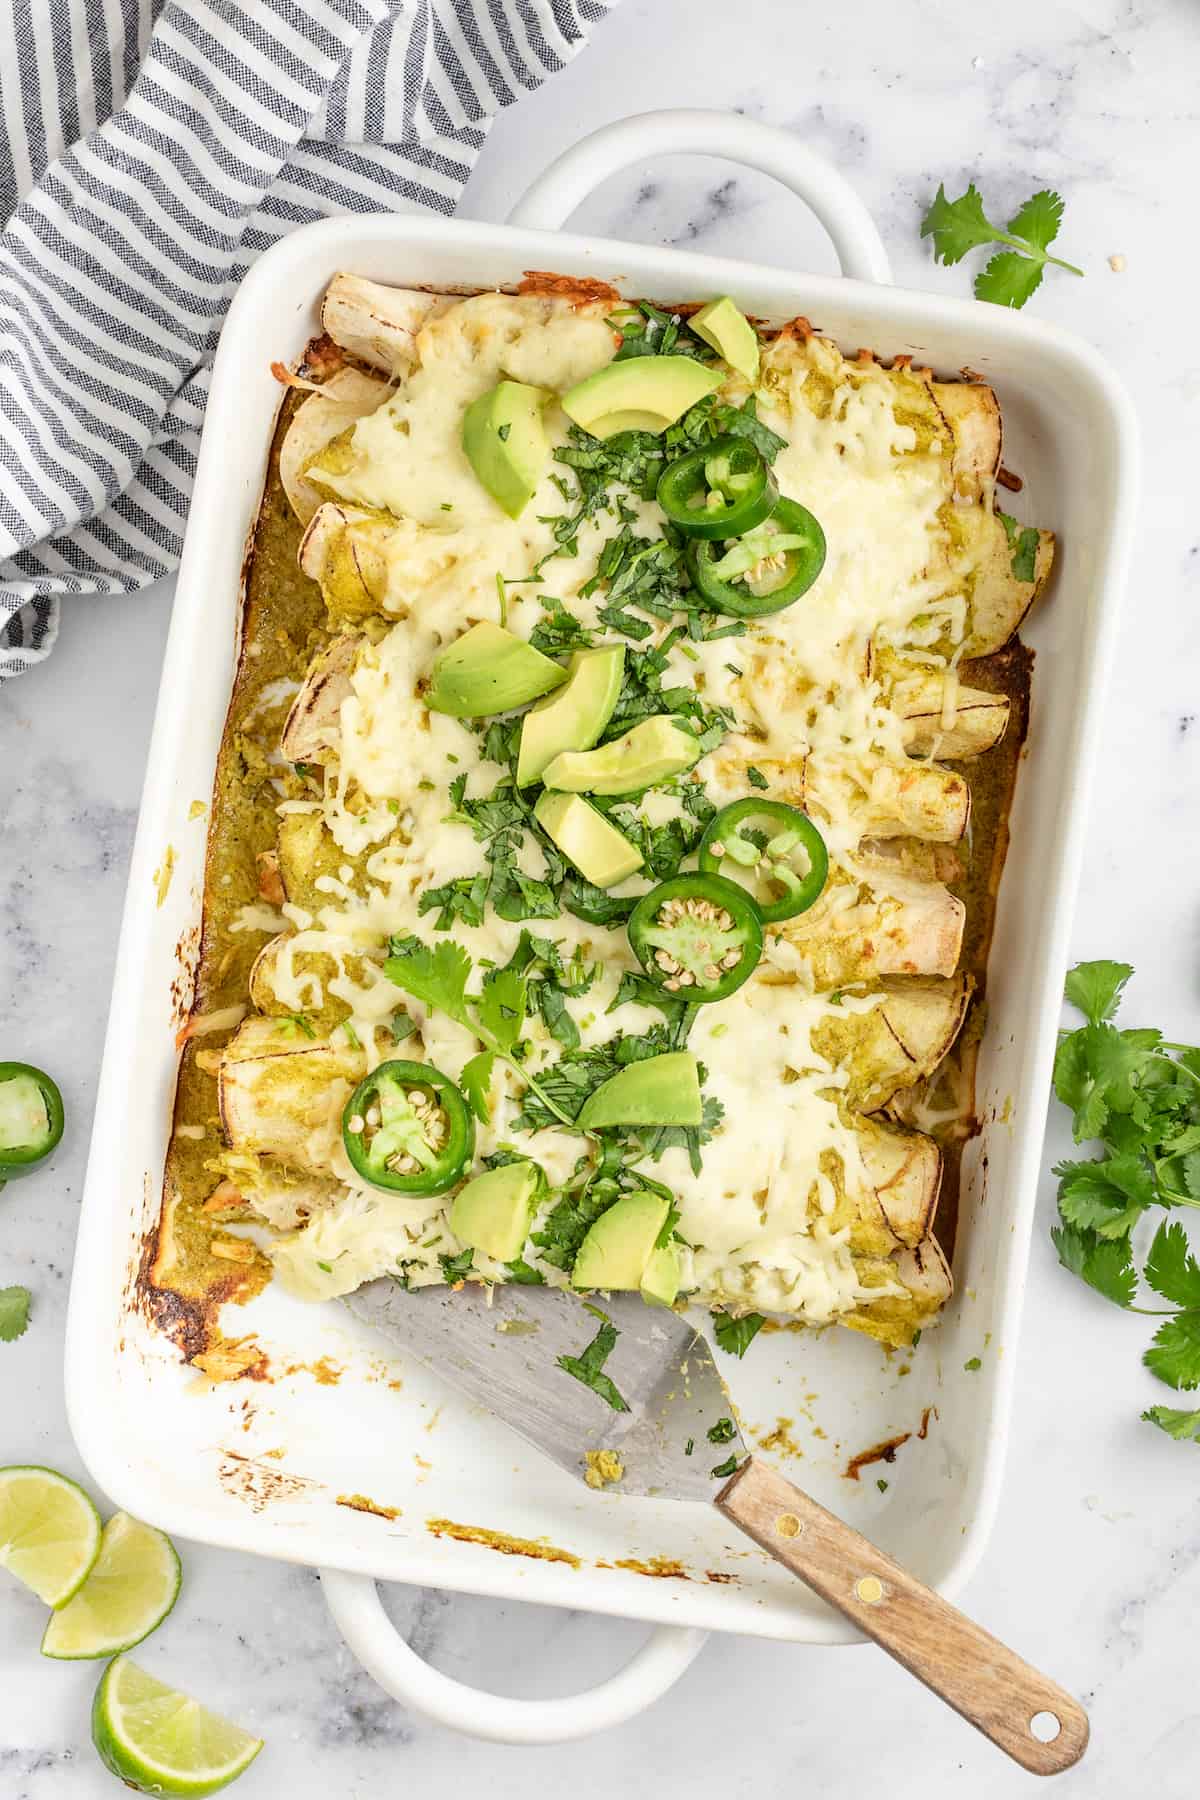 c،erole dish with creamy chicken enchiladas verdes with limes and jalapenos as garnishes